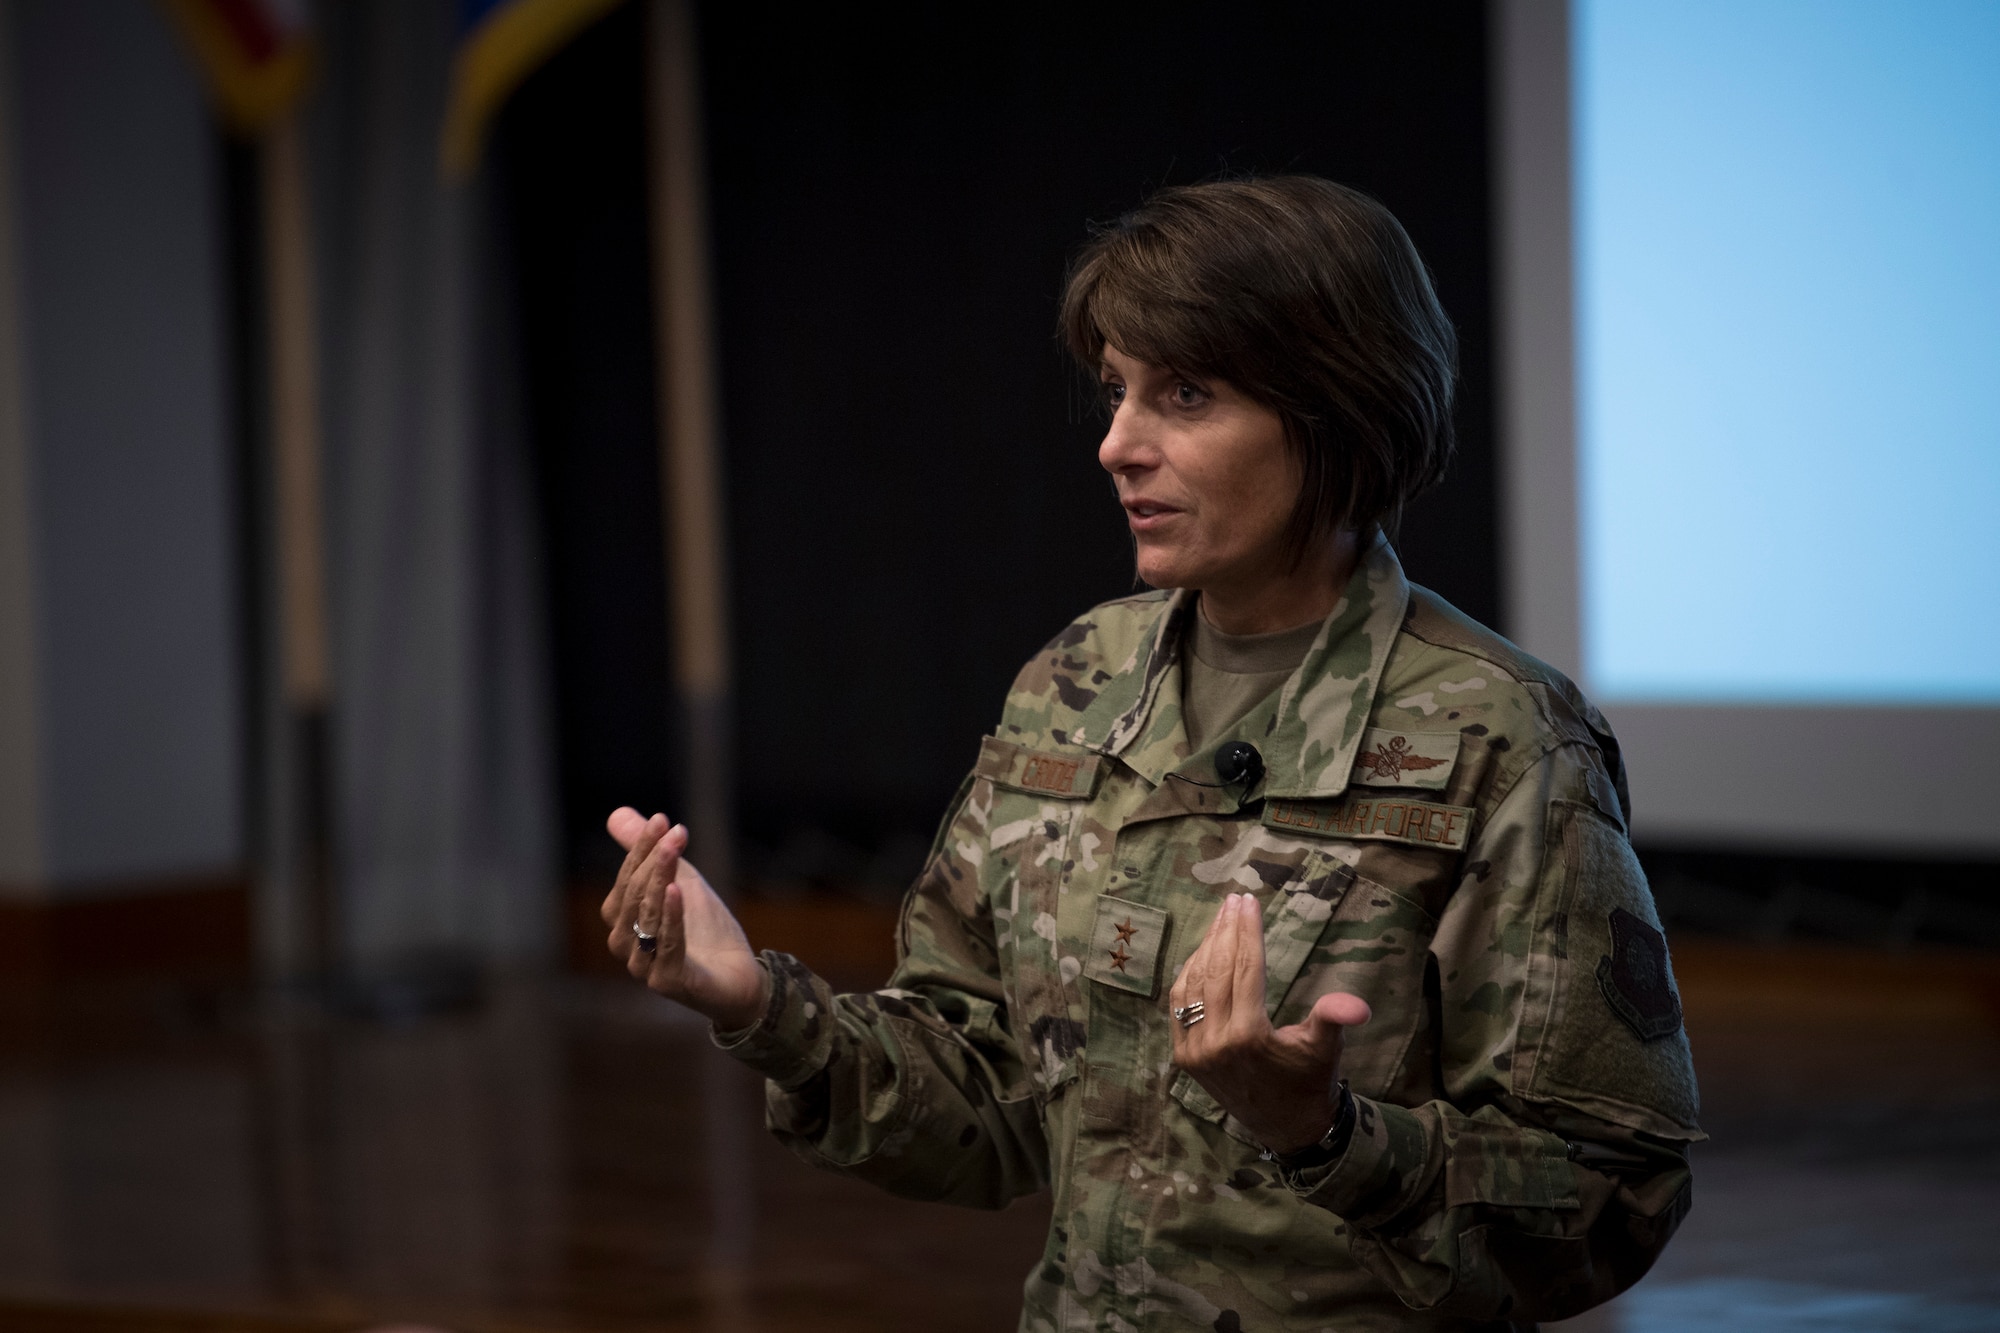 Maj. Gen. Kimberly Crider, mobilization assistant to the Air Force Space Command commander, gives the keynote speech at the AFSPC Chief Data Office Innovation Summit at Headquarters AFSPC, July 30-31, 2019. AFSPC held the event to unveil the command’s new enterprise data strategy, its construct, why it is needed, and how it will make U.S. and Allied warfighters more agile and lethal. (U.S. Air Force photo by Staff Sgt. Dennis Hoffman)